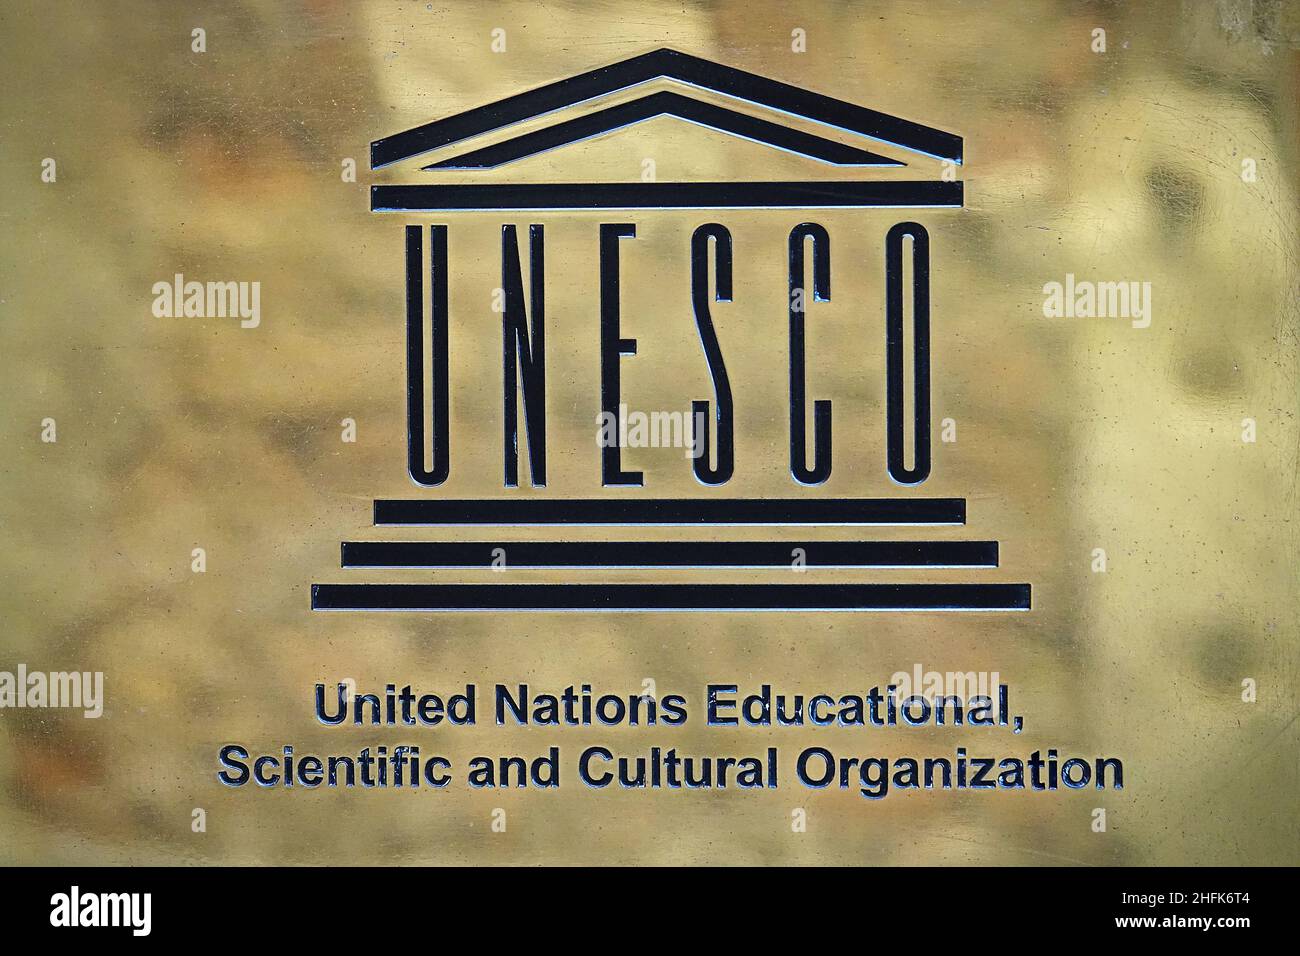 UNESCO logo on brass plate. UNESCO, the United Nations Educational, Scientific and Cultural Organisation. Paris, France - January 2022 Stock Photo